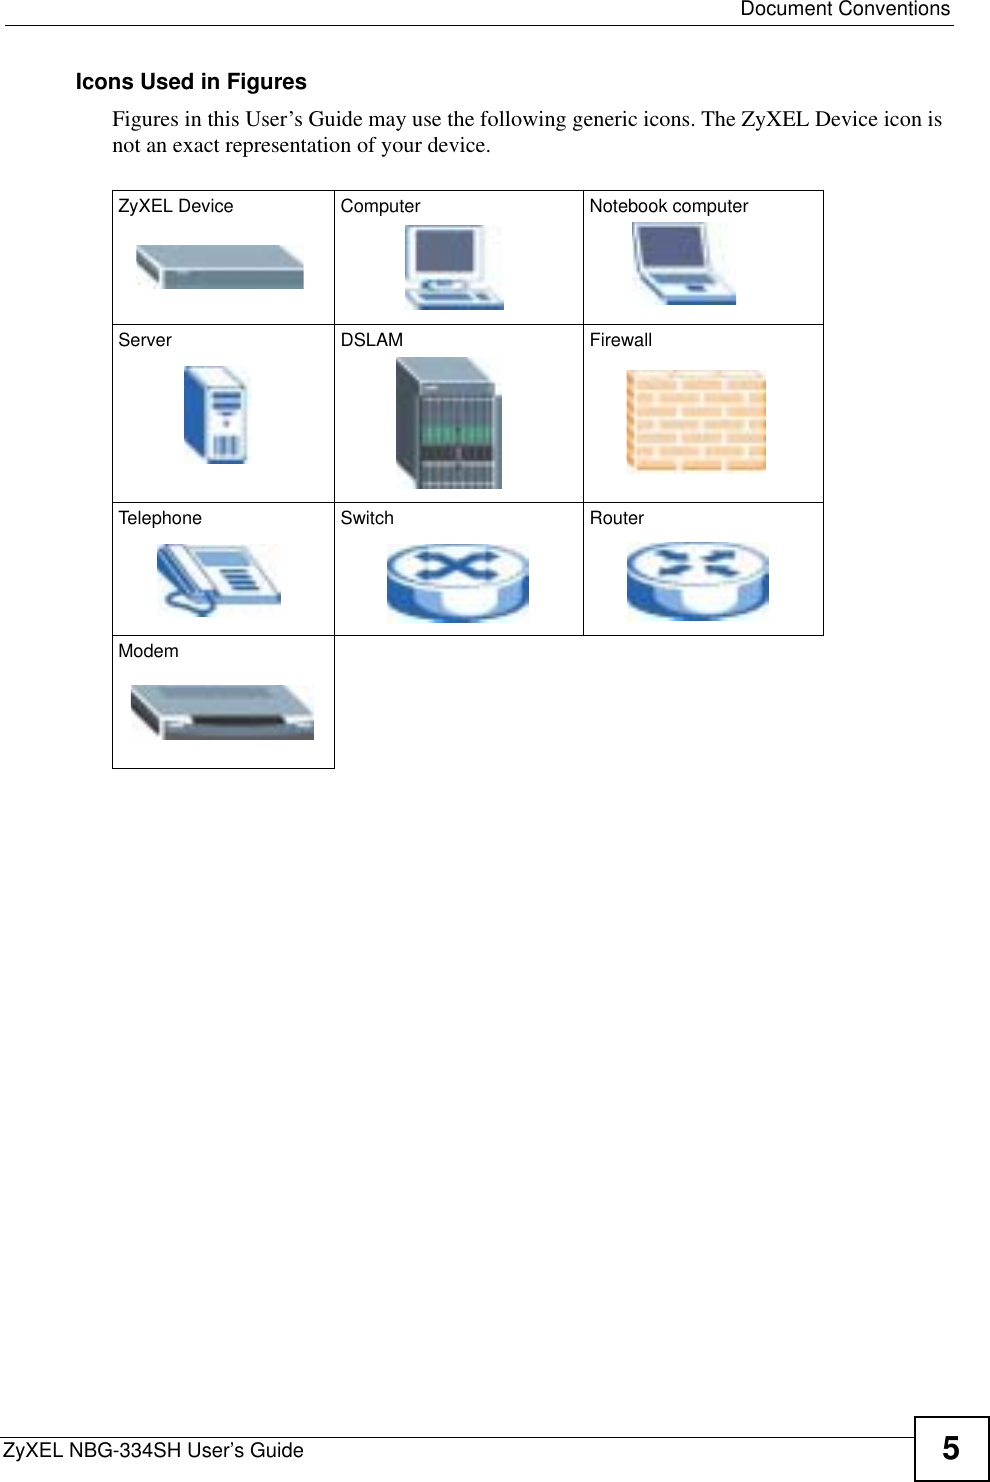  Document ConventionsZyXEL NBG-334SH User’s Guide 5Icons Used in FiguresFigures in this User’s Guide may use the following generic icons. The ZyXEL Device icon is not an exact representation of your device.ZyXEL Device Computer Notebook computerServer DSLAM FirewallTelephone Switch RouterModem